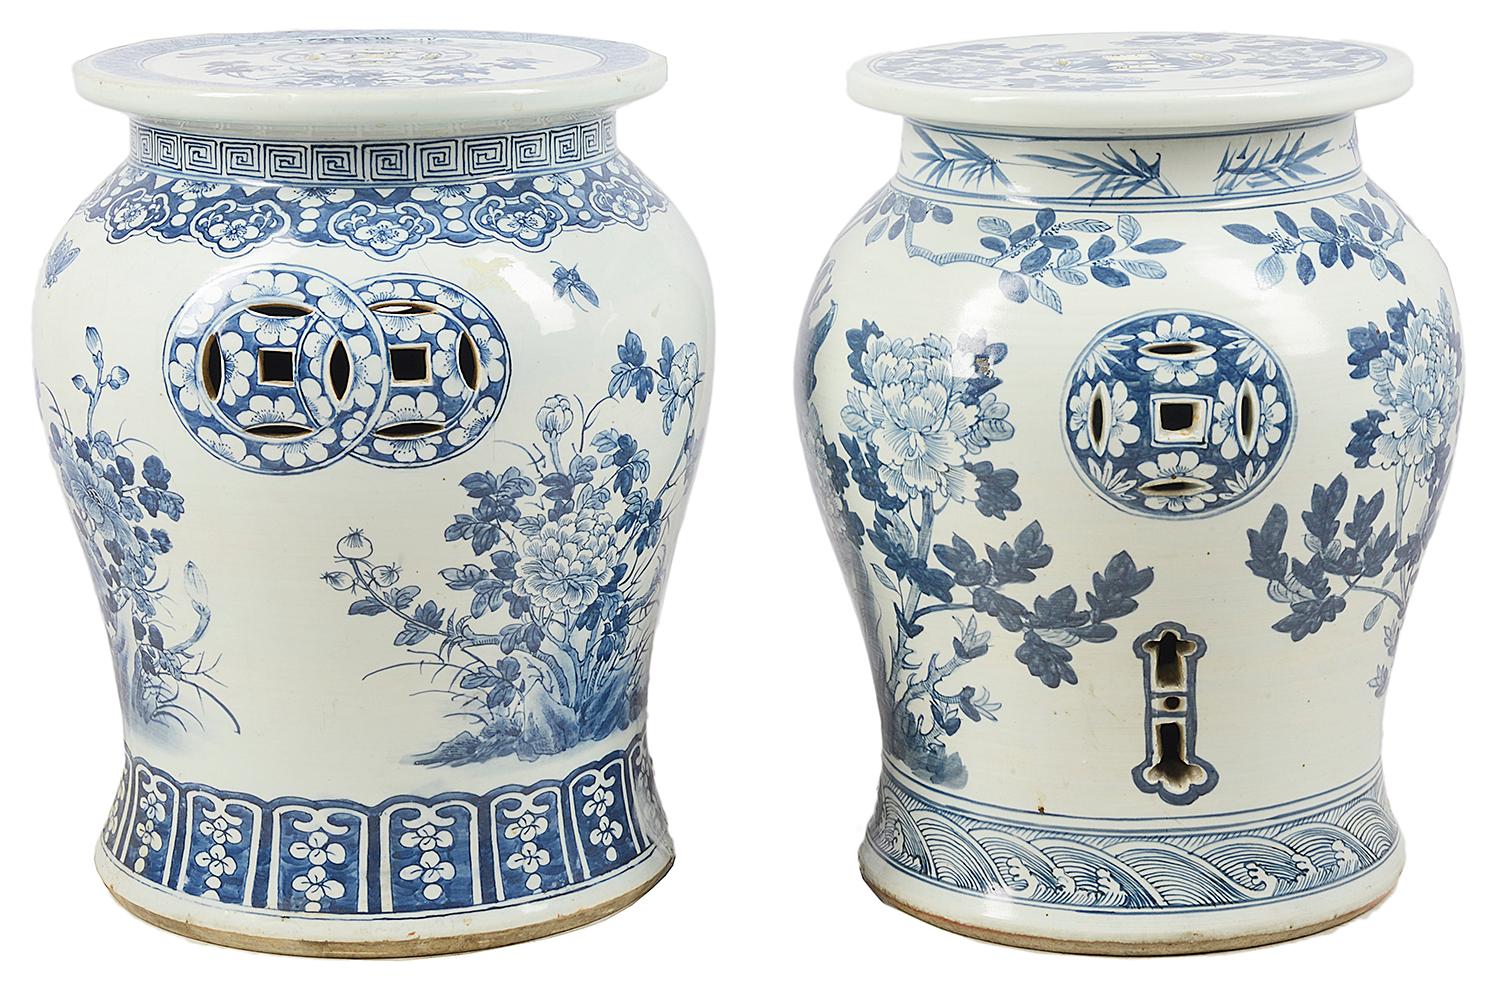 Chinese Export Near Pair of Early 20th Century Chinese Blue and White Porcelain Garden Seats